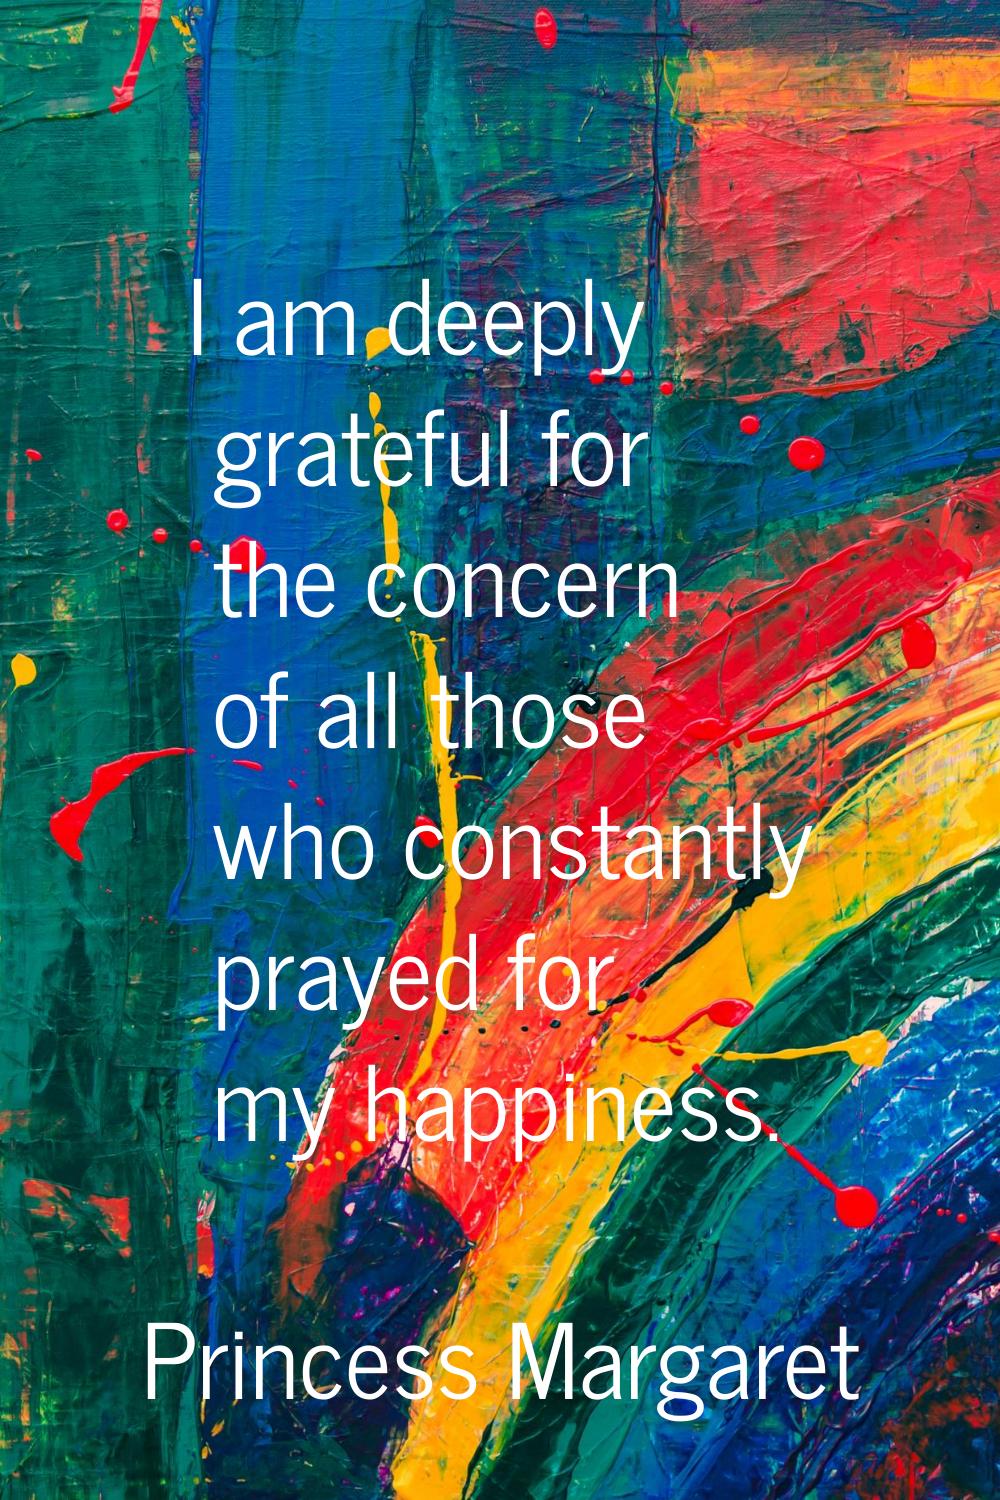 I am deeply grateful for the concern of all those who constantly prayed for my happiness.